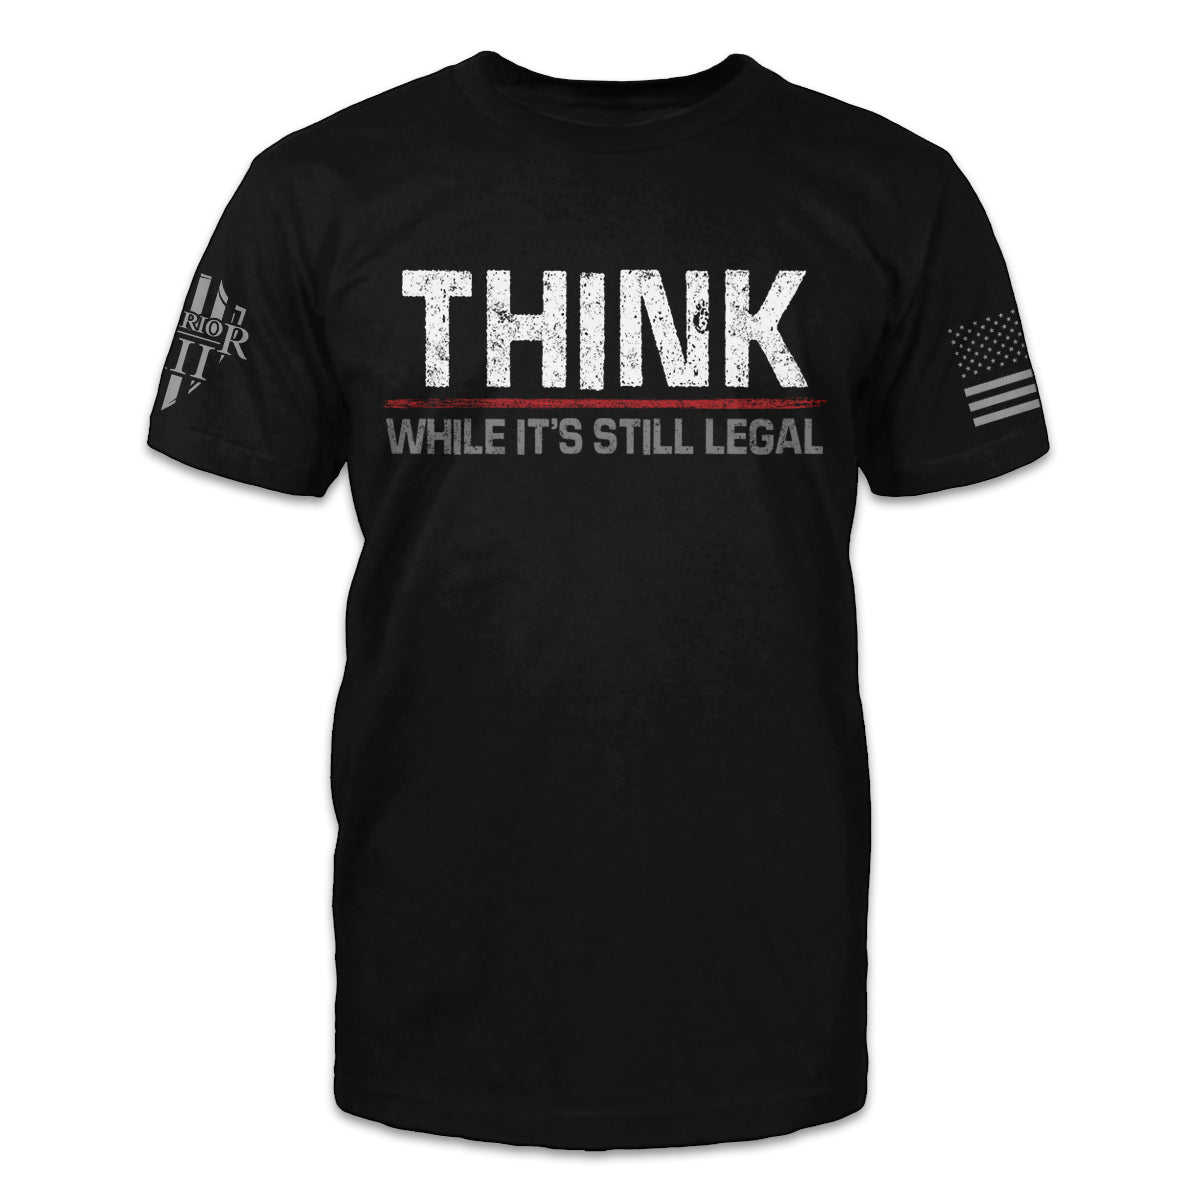 A black t-shirt with the the words "Think While It's Still Legal" printed on the front of the shirt.